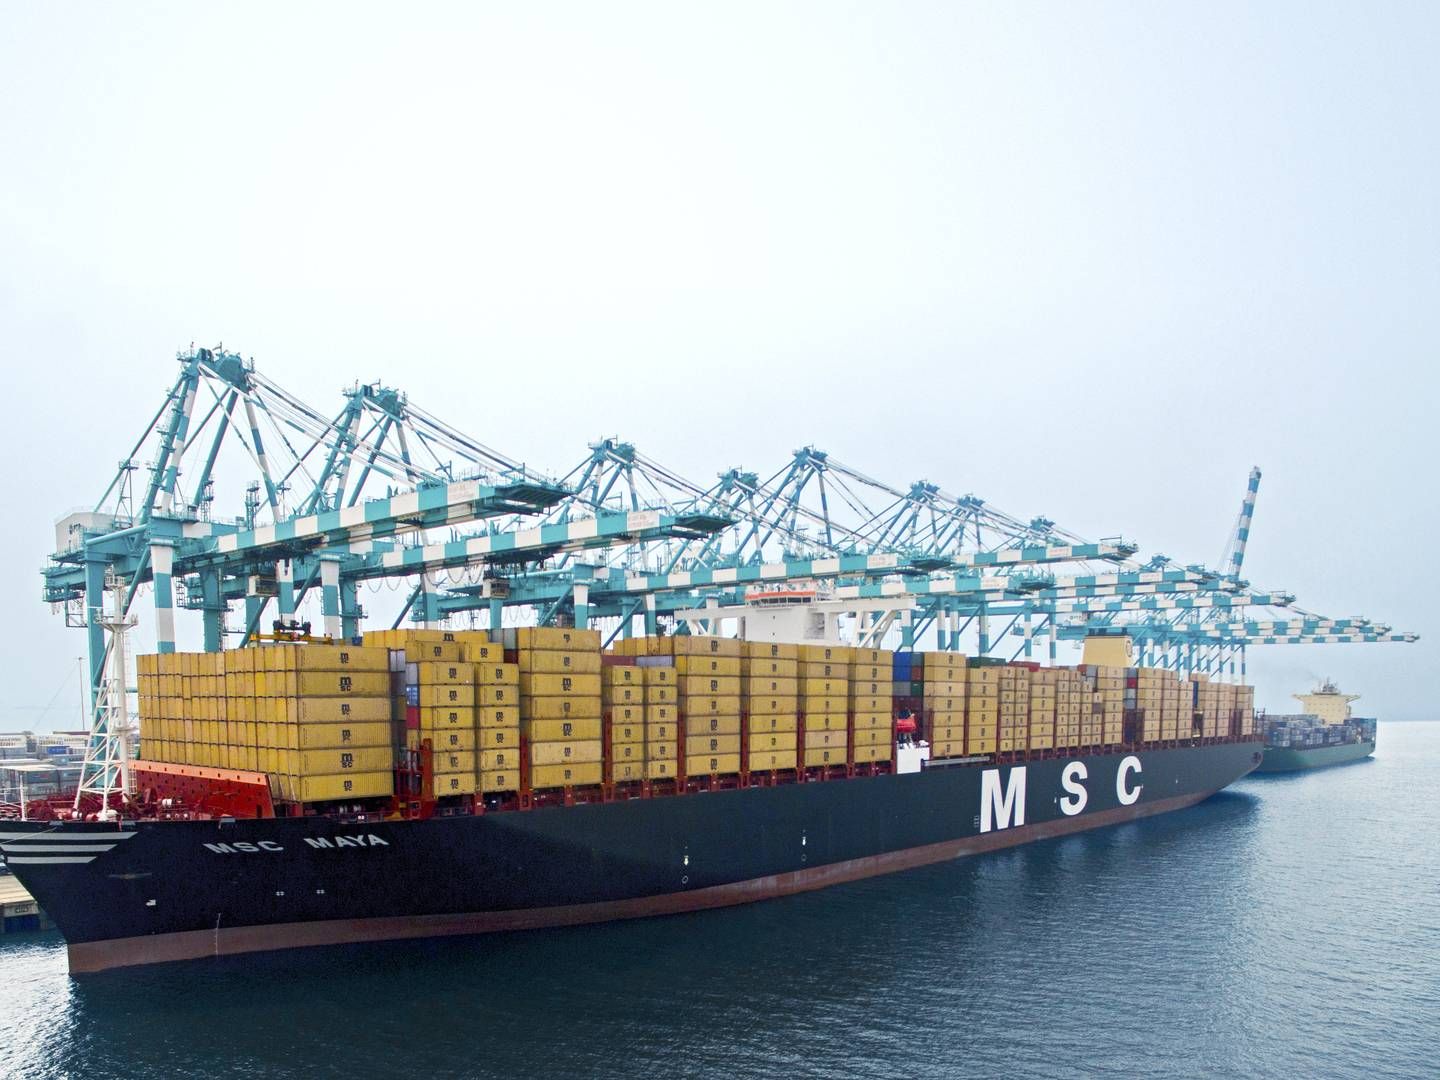 The world's largest container carrier, MSC, currently has 118 ships under construction at shipyards, corresponding to more than a third of the existing fleet. | Photo: PR / MSC